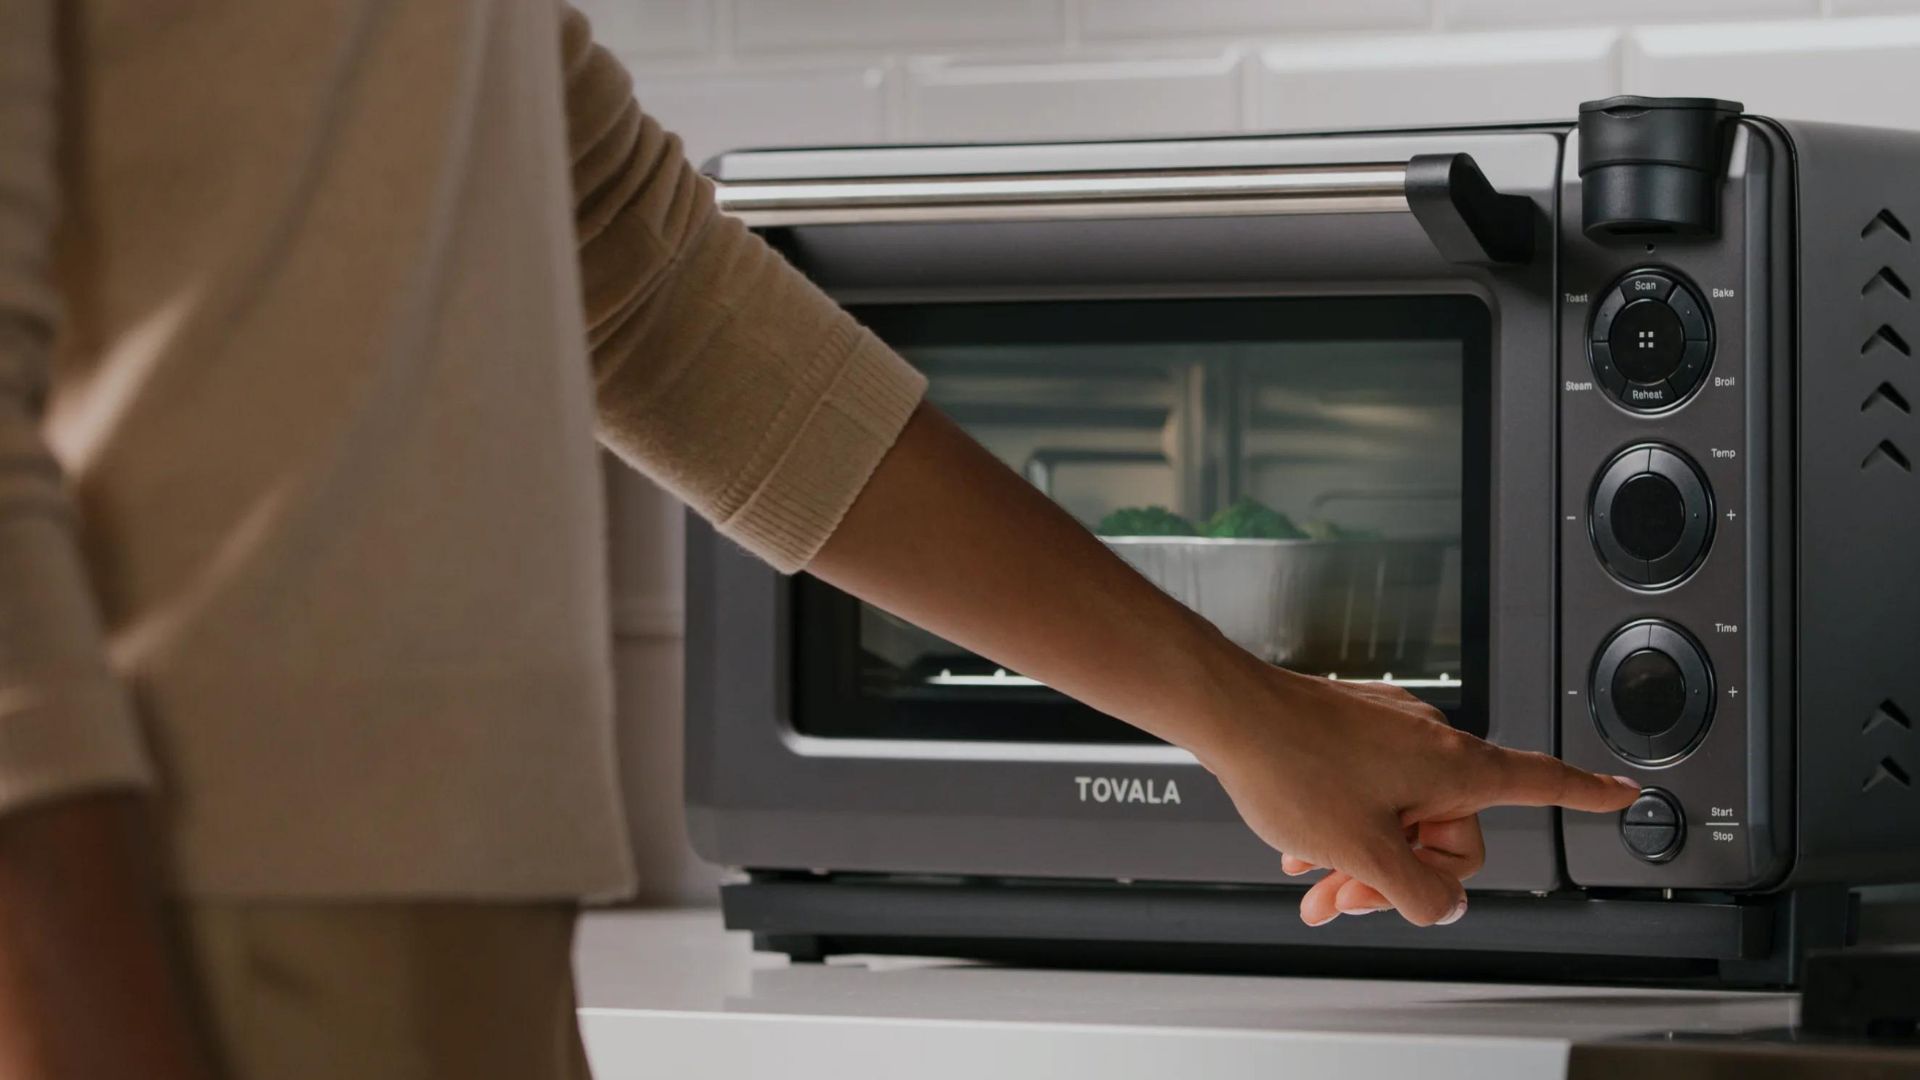 My Tovala Smart Oven Experience + Tovala Reviews By MSA Readers